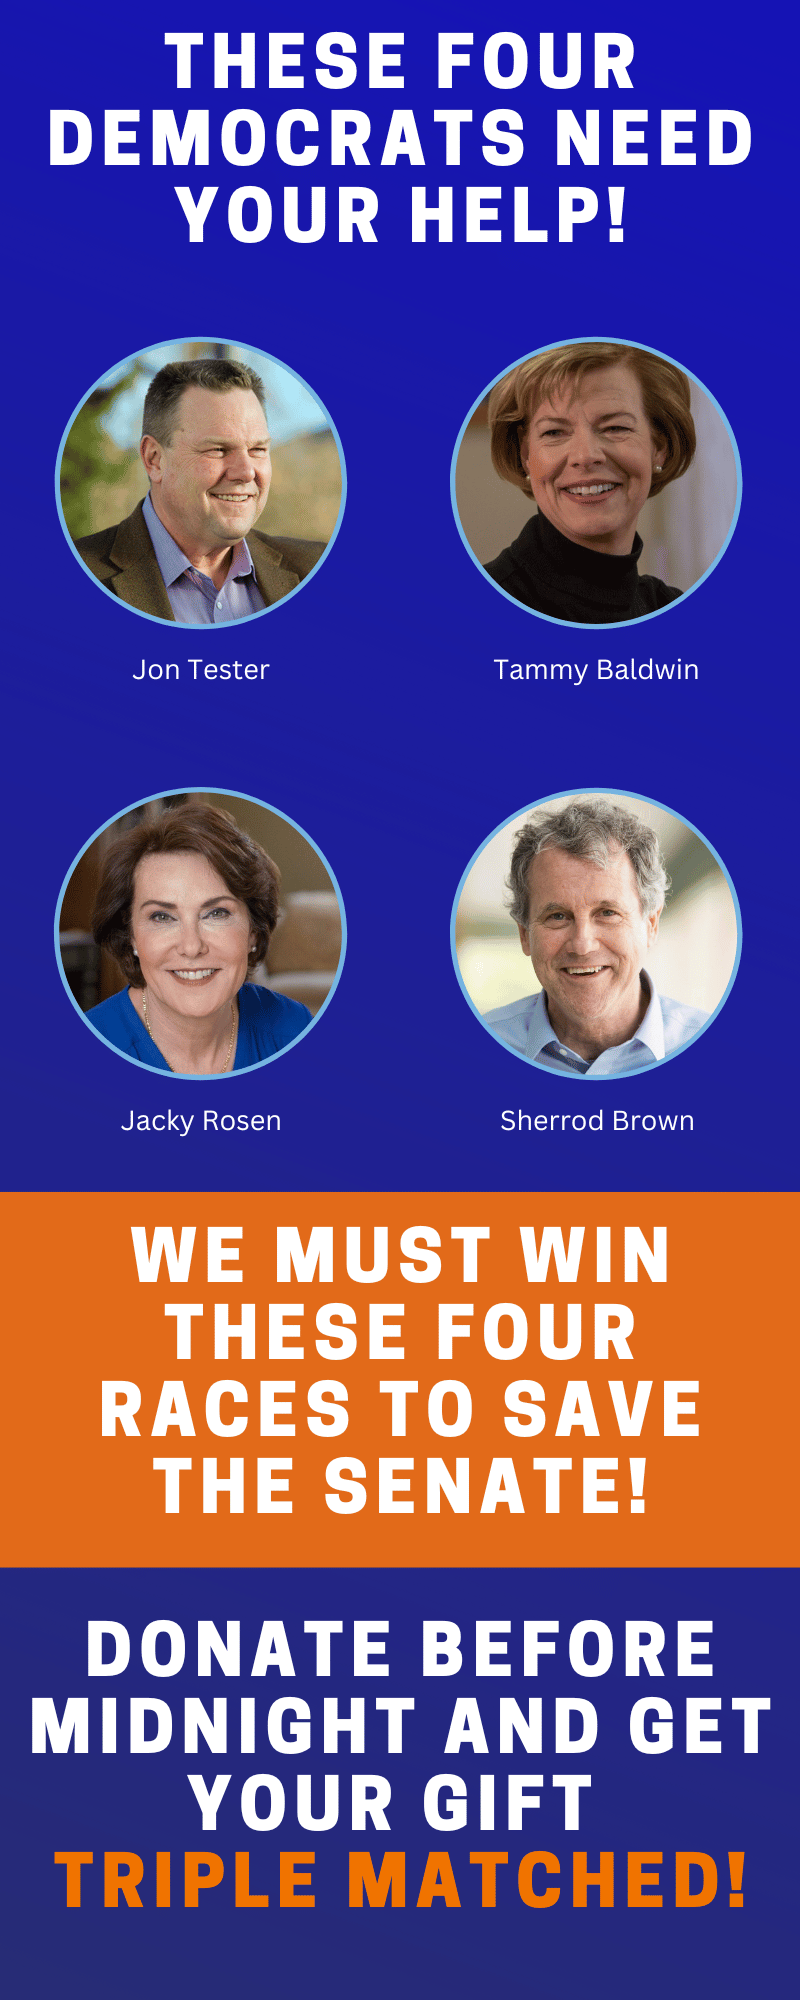 These four Democrats need your help! We must win these four races to save the Senate! Donate before midnight and get you gift DOUBLE MATCHED!